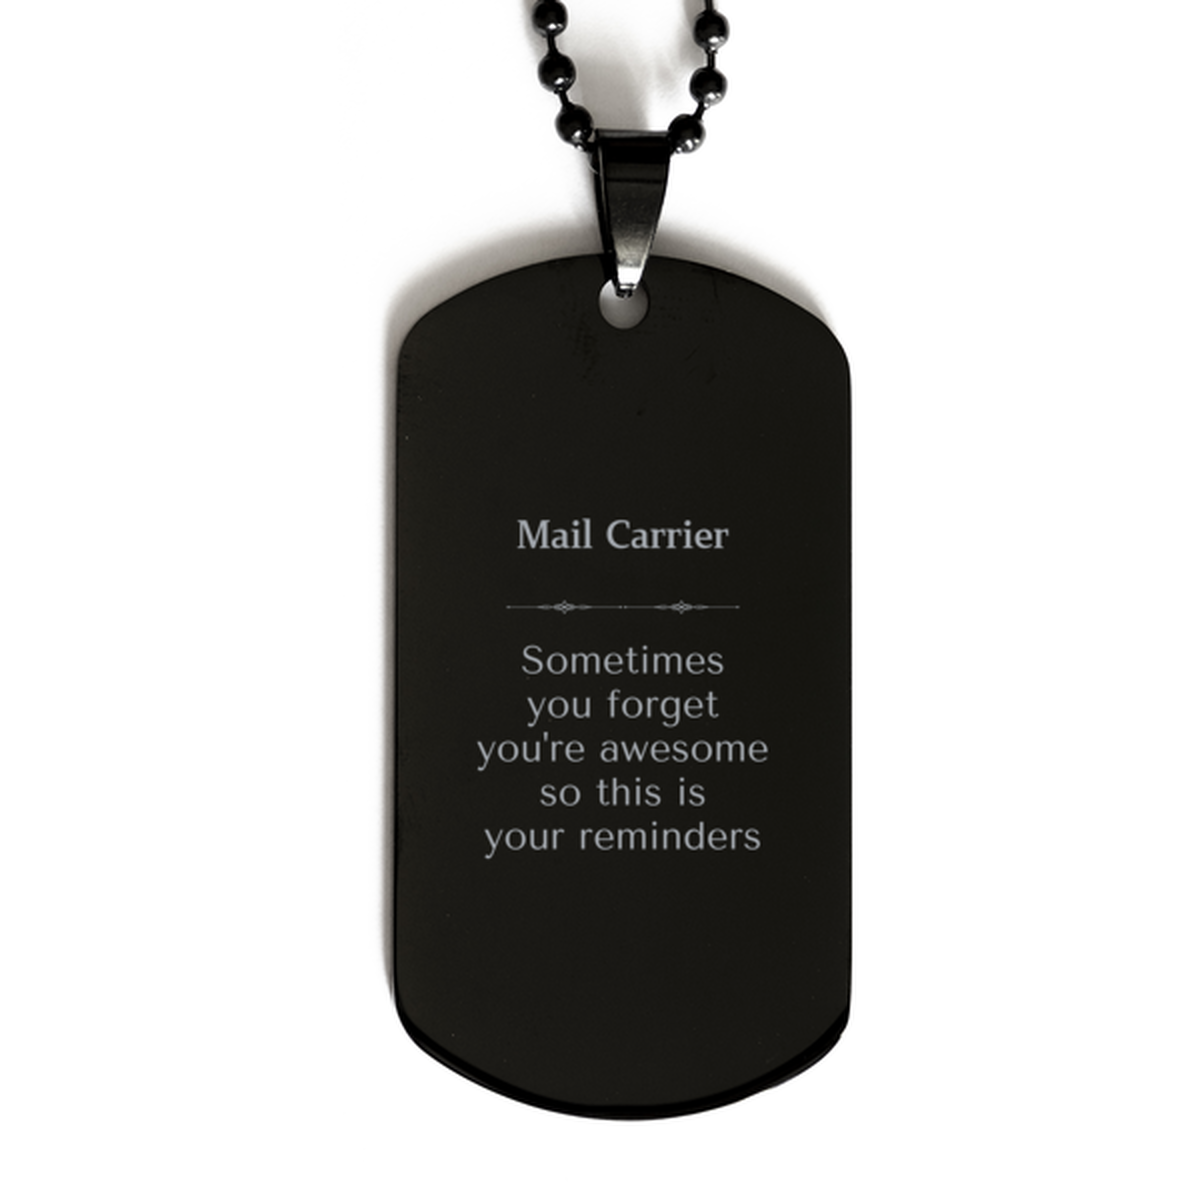 Sentimental Mail Carrier Black Dog Tag, Mail Carrier Sometimes you forget you're awesome so this is your reminders, Graduation Christmas Birthday Gifts for Mail Carrier, Men, Women, Coworkers